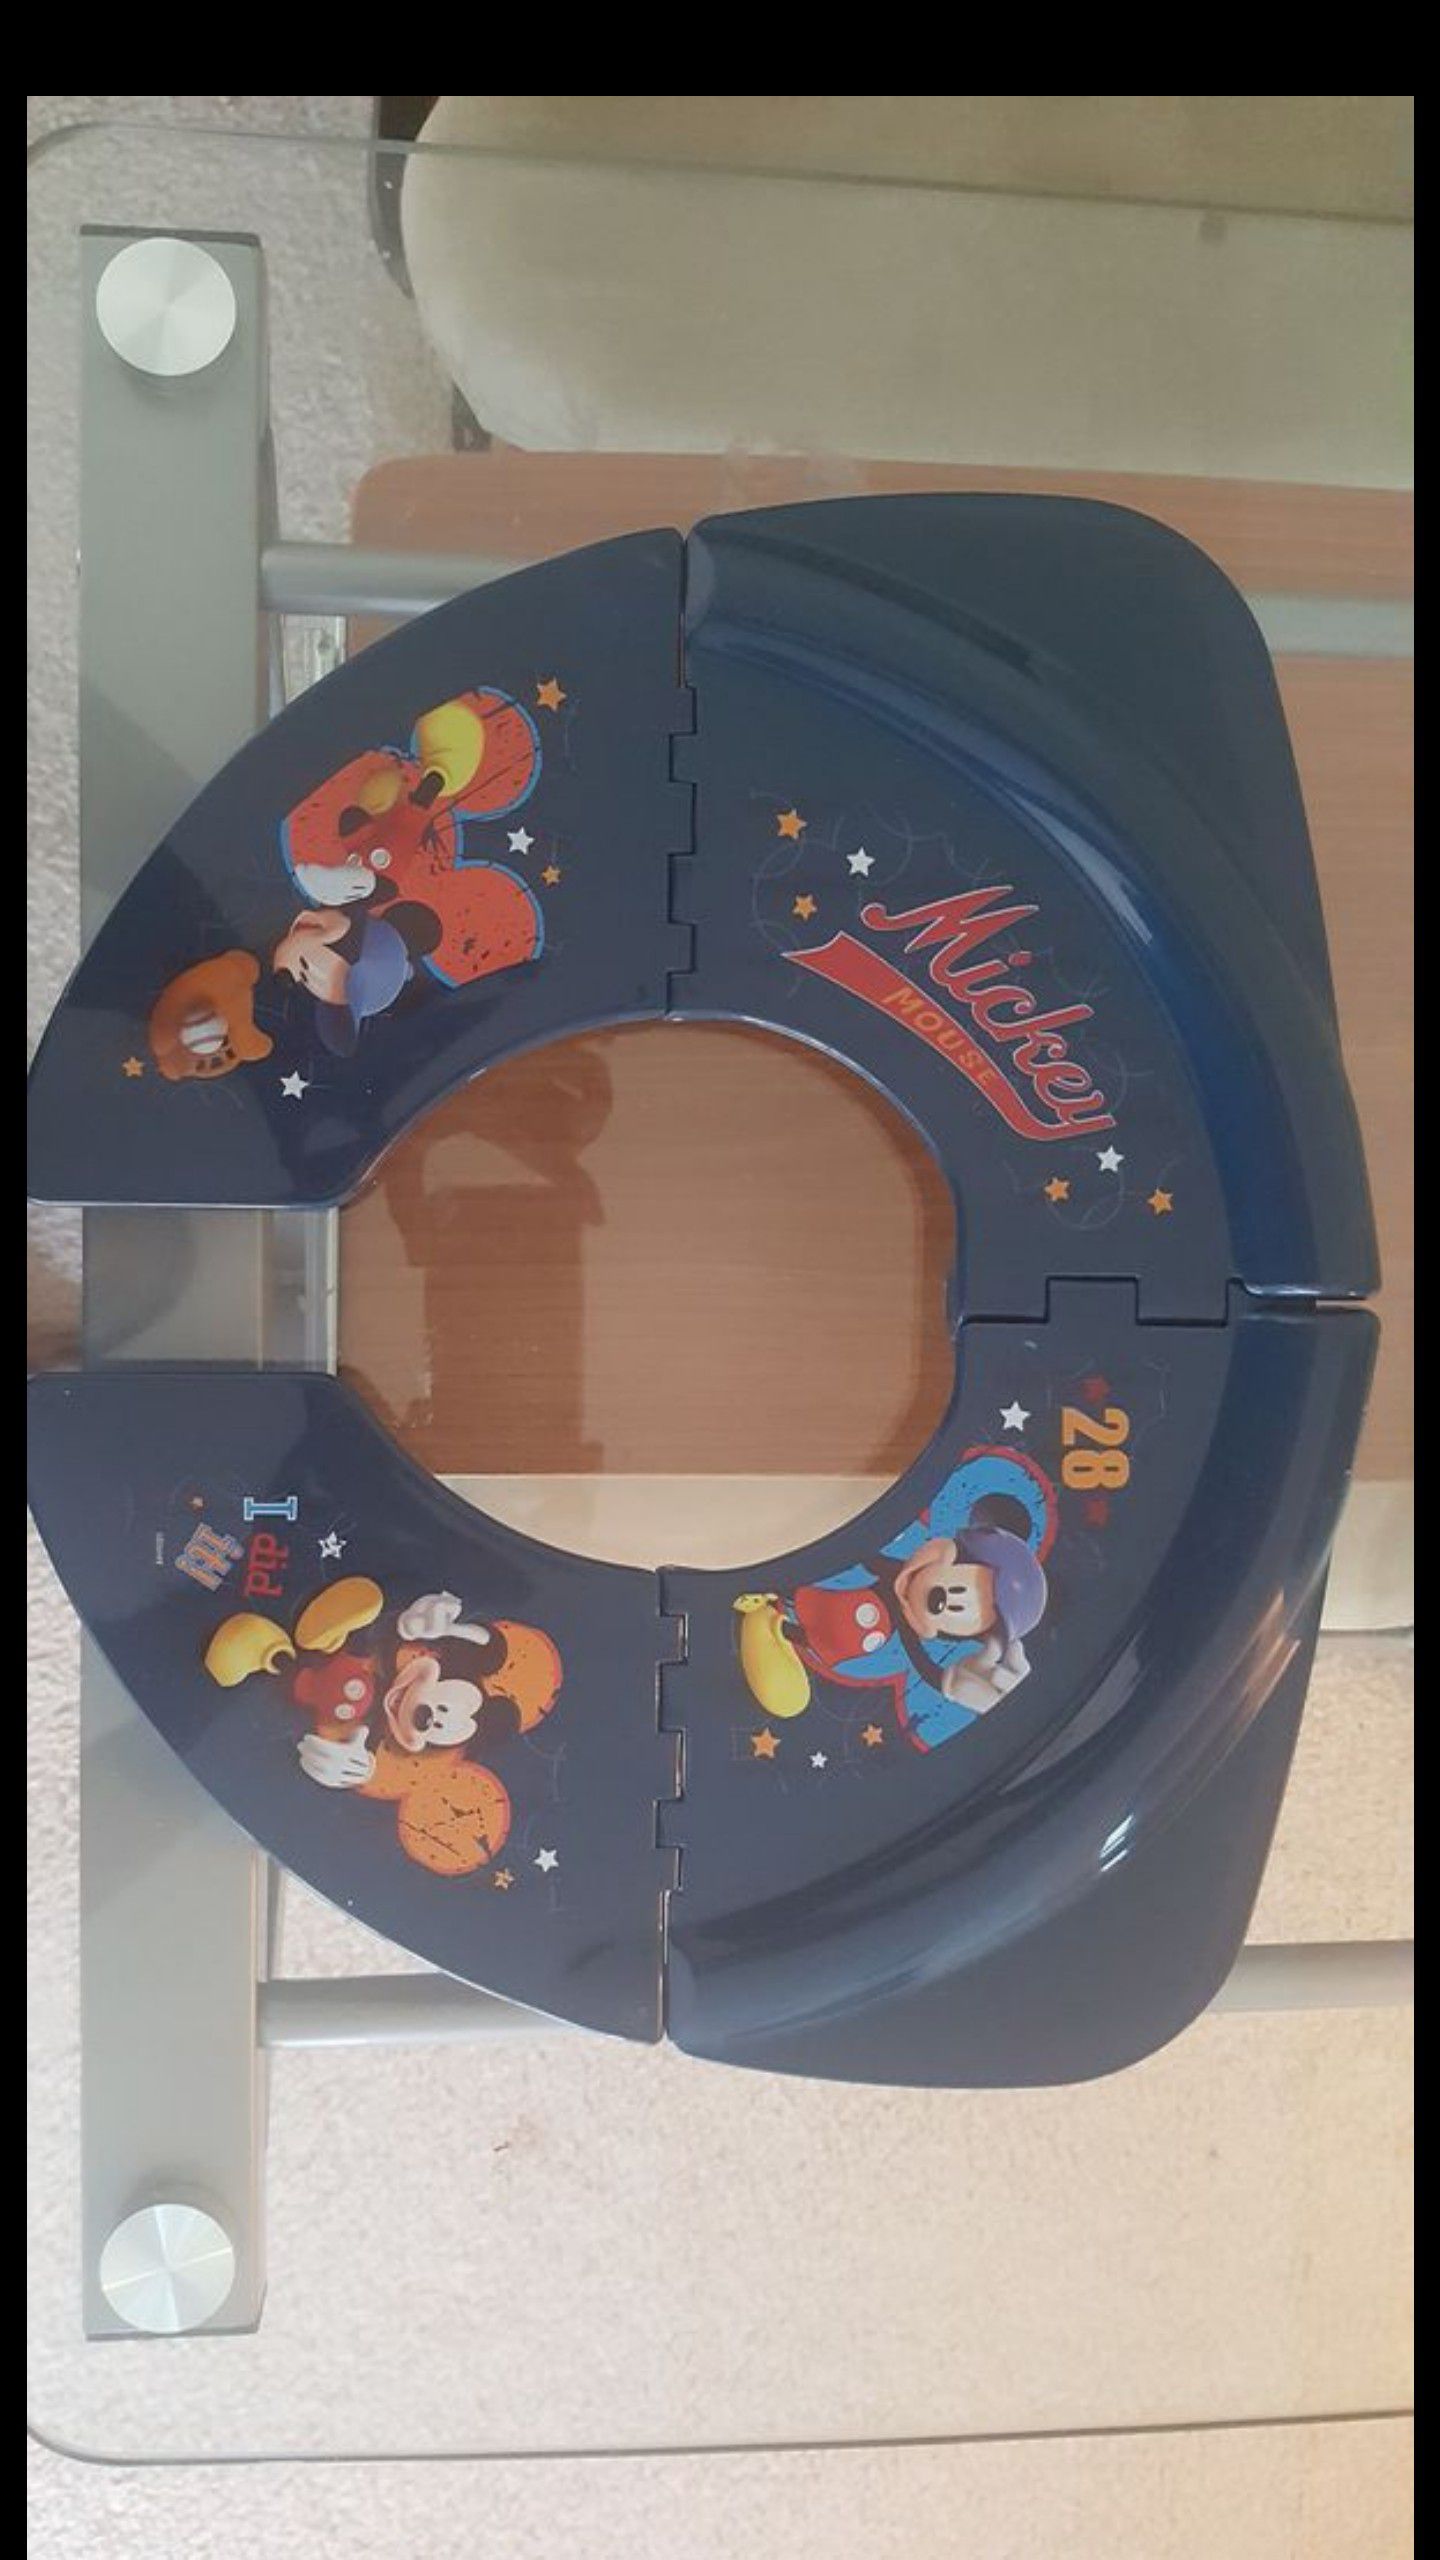 NEVER USED - Portable foldable micky mouse potty seat in a bag